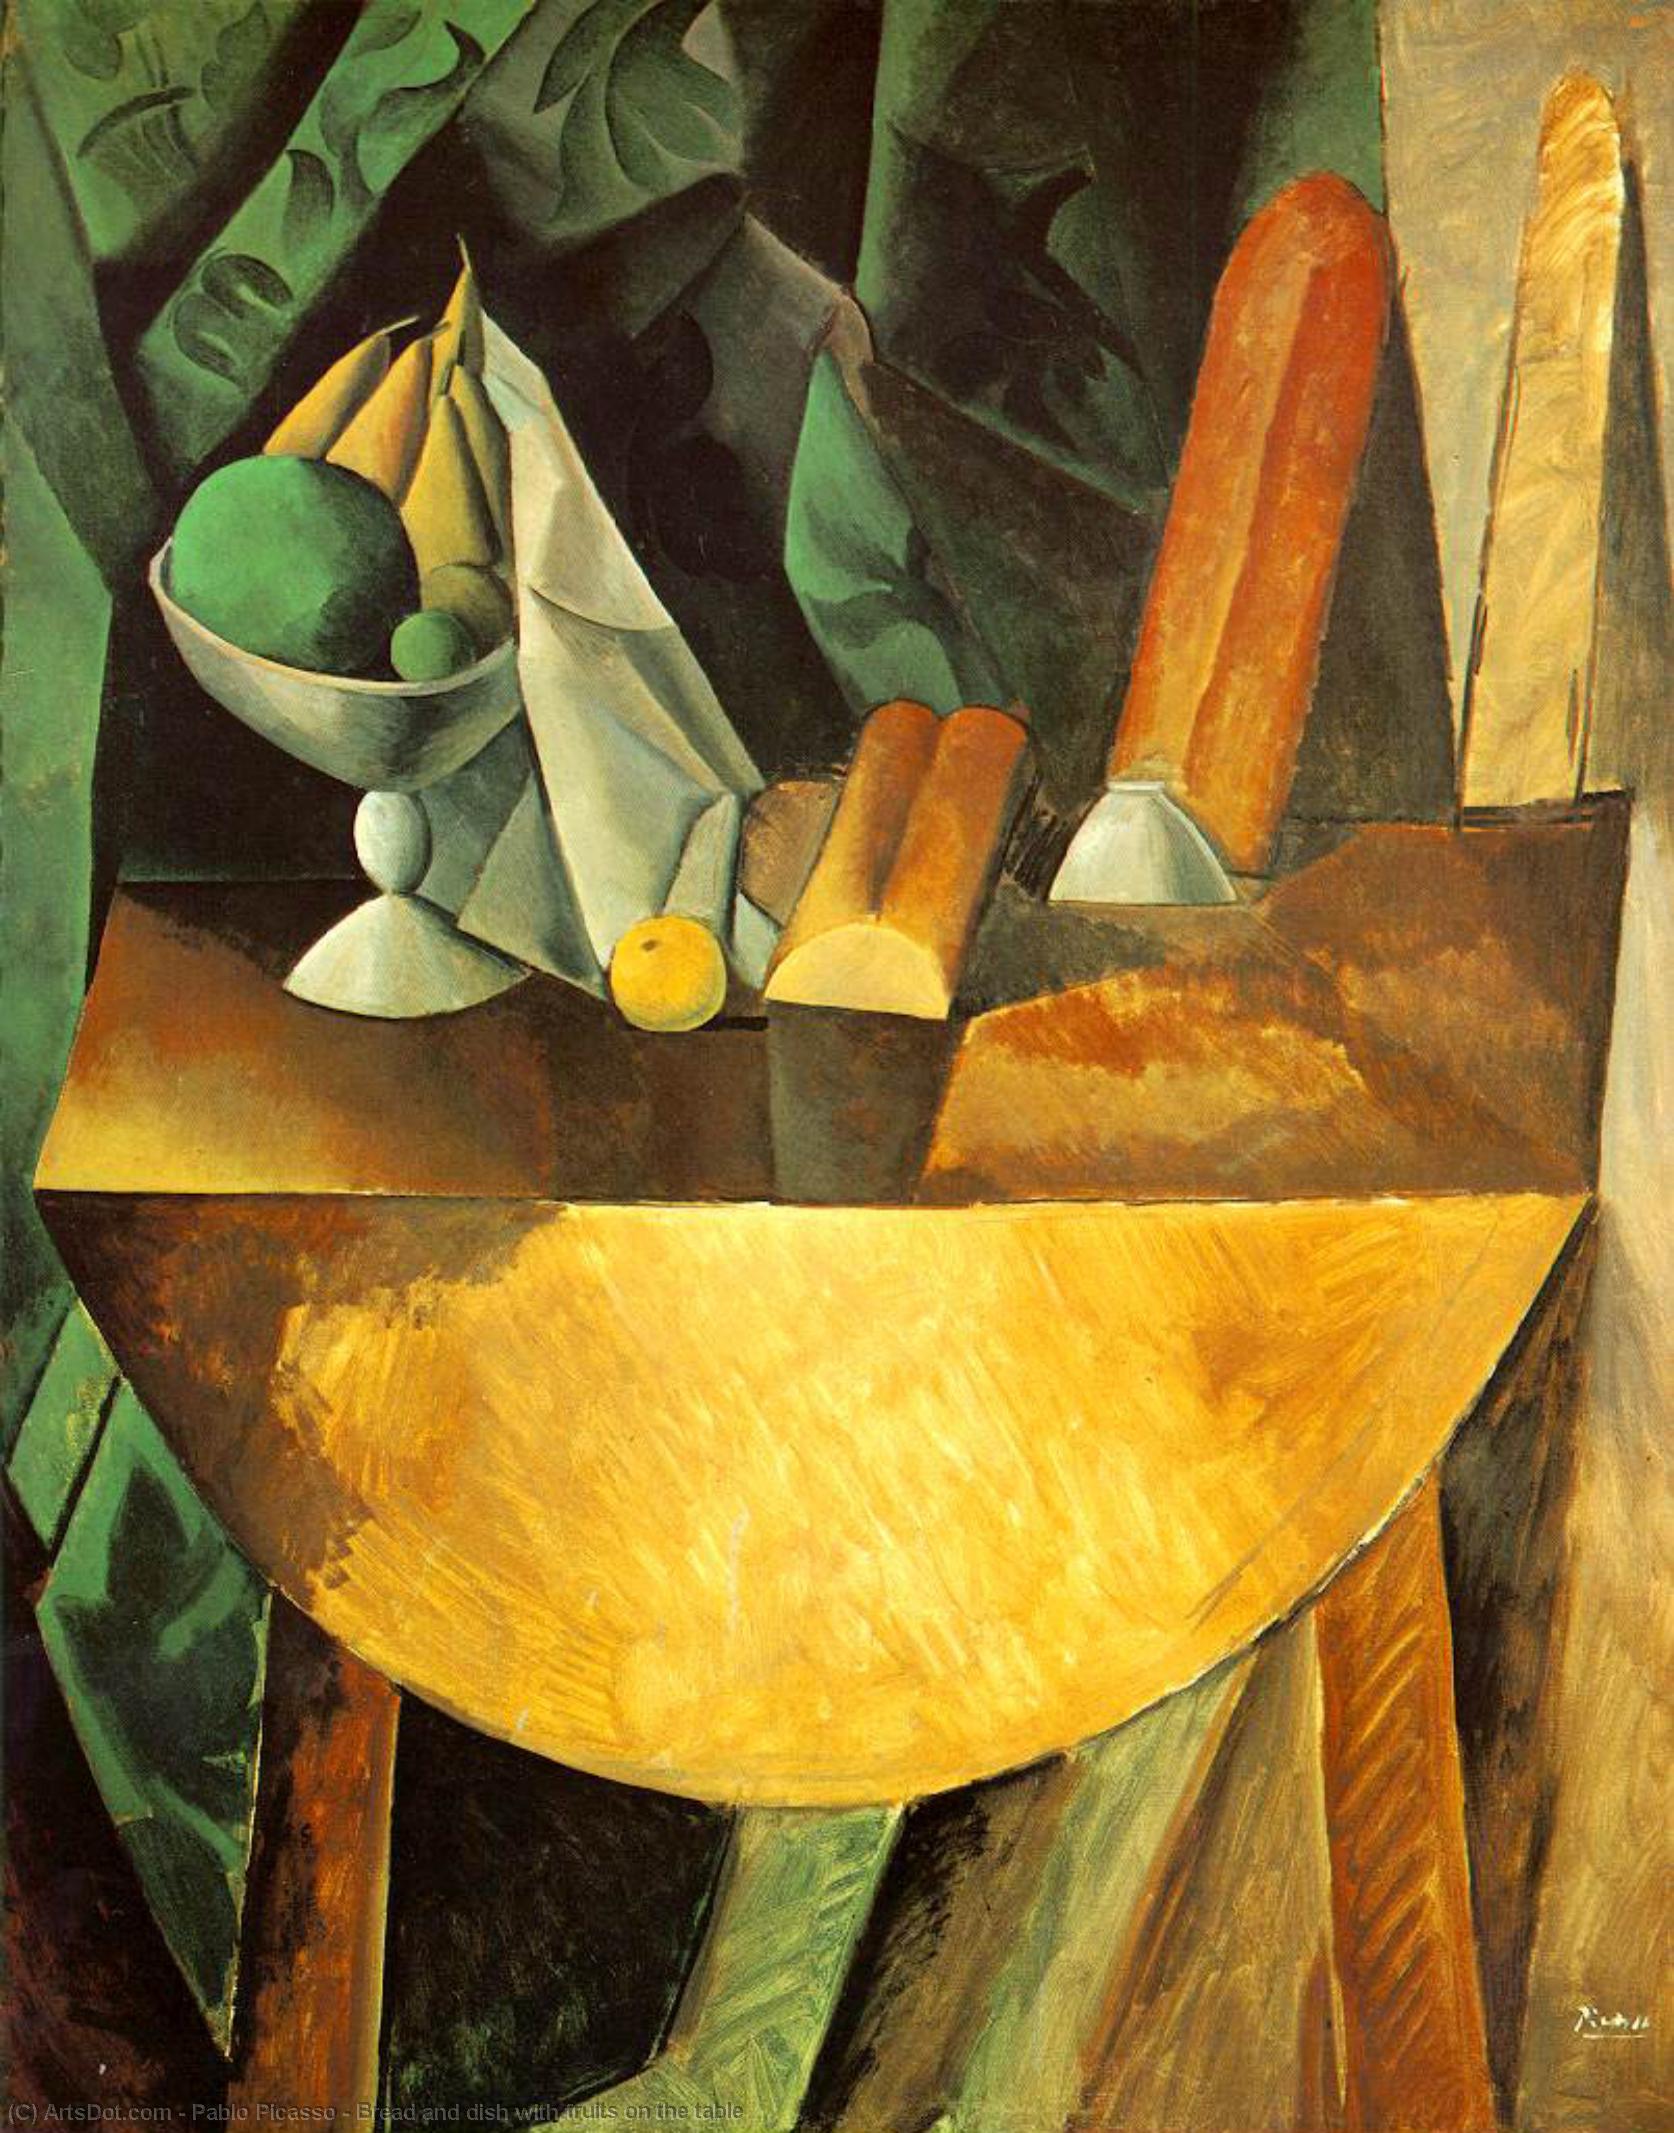 WikiOO.org - Encyclopedia of Fine Arts - Maleri, Artwork Pablo Picasso - Bread and dish with fruits on the table